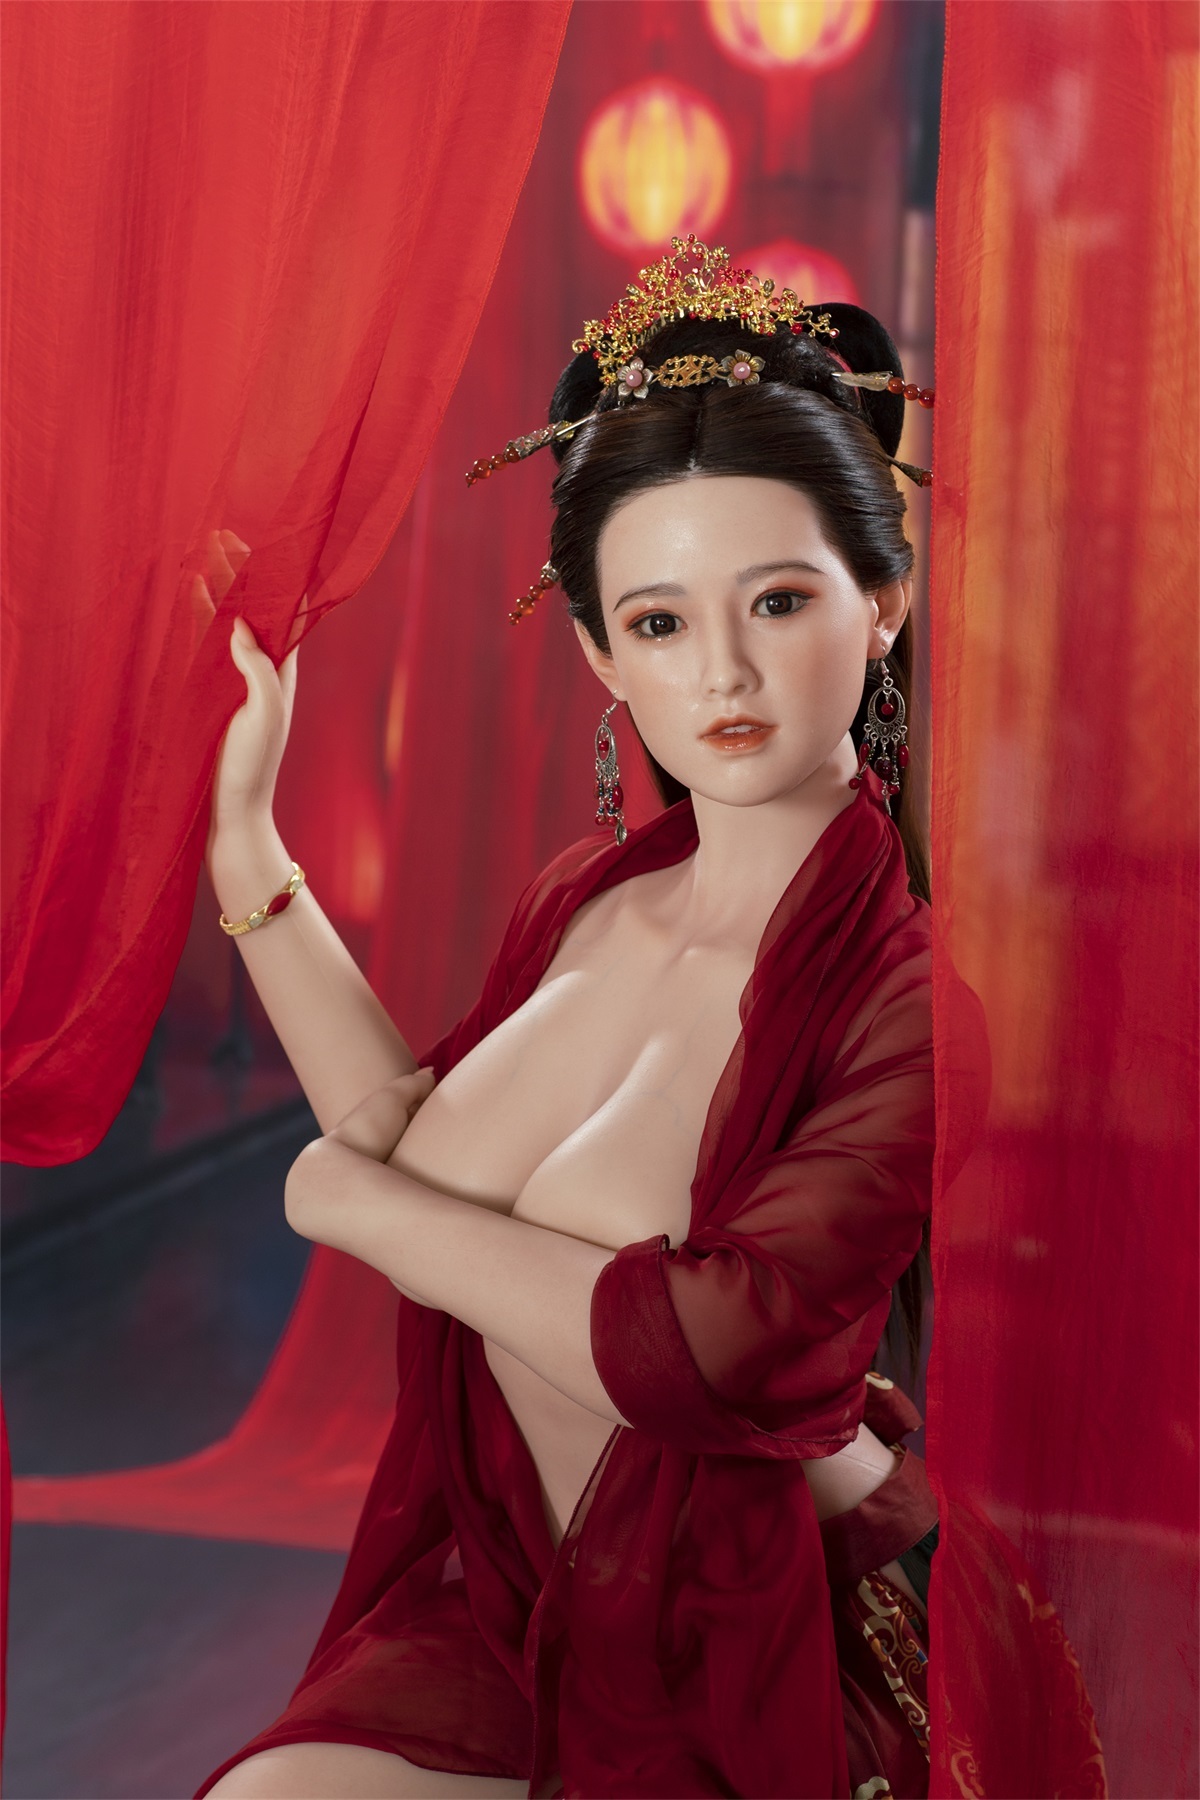 Bebe - Japanese Style Big Boobs Gentle Realistic Silicone Sex Doll (5 Sizes)